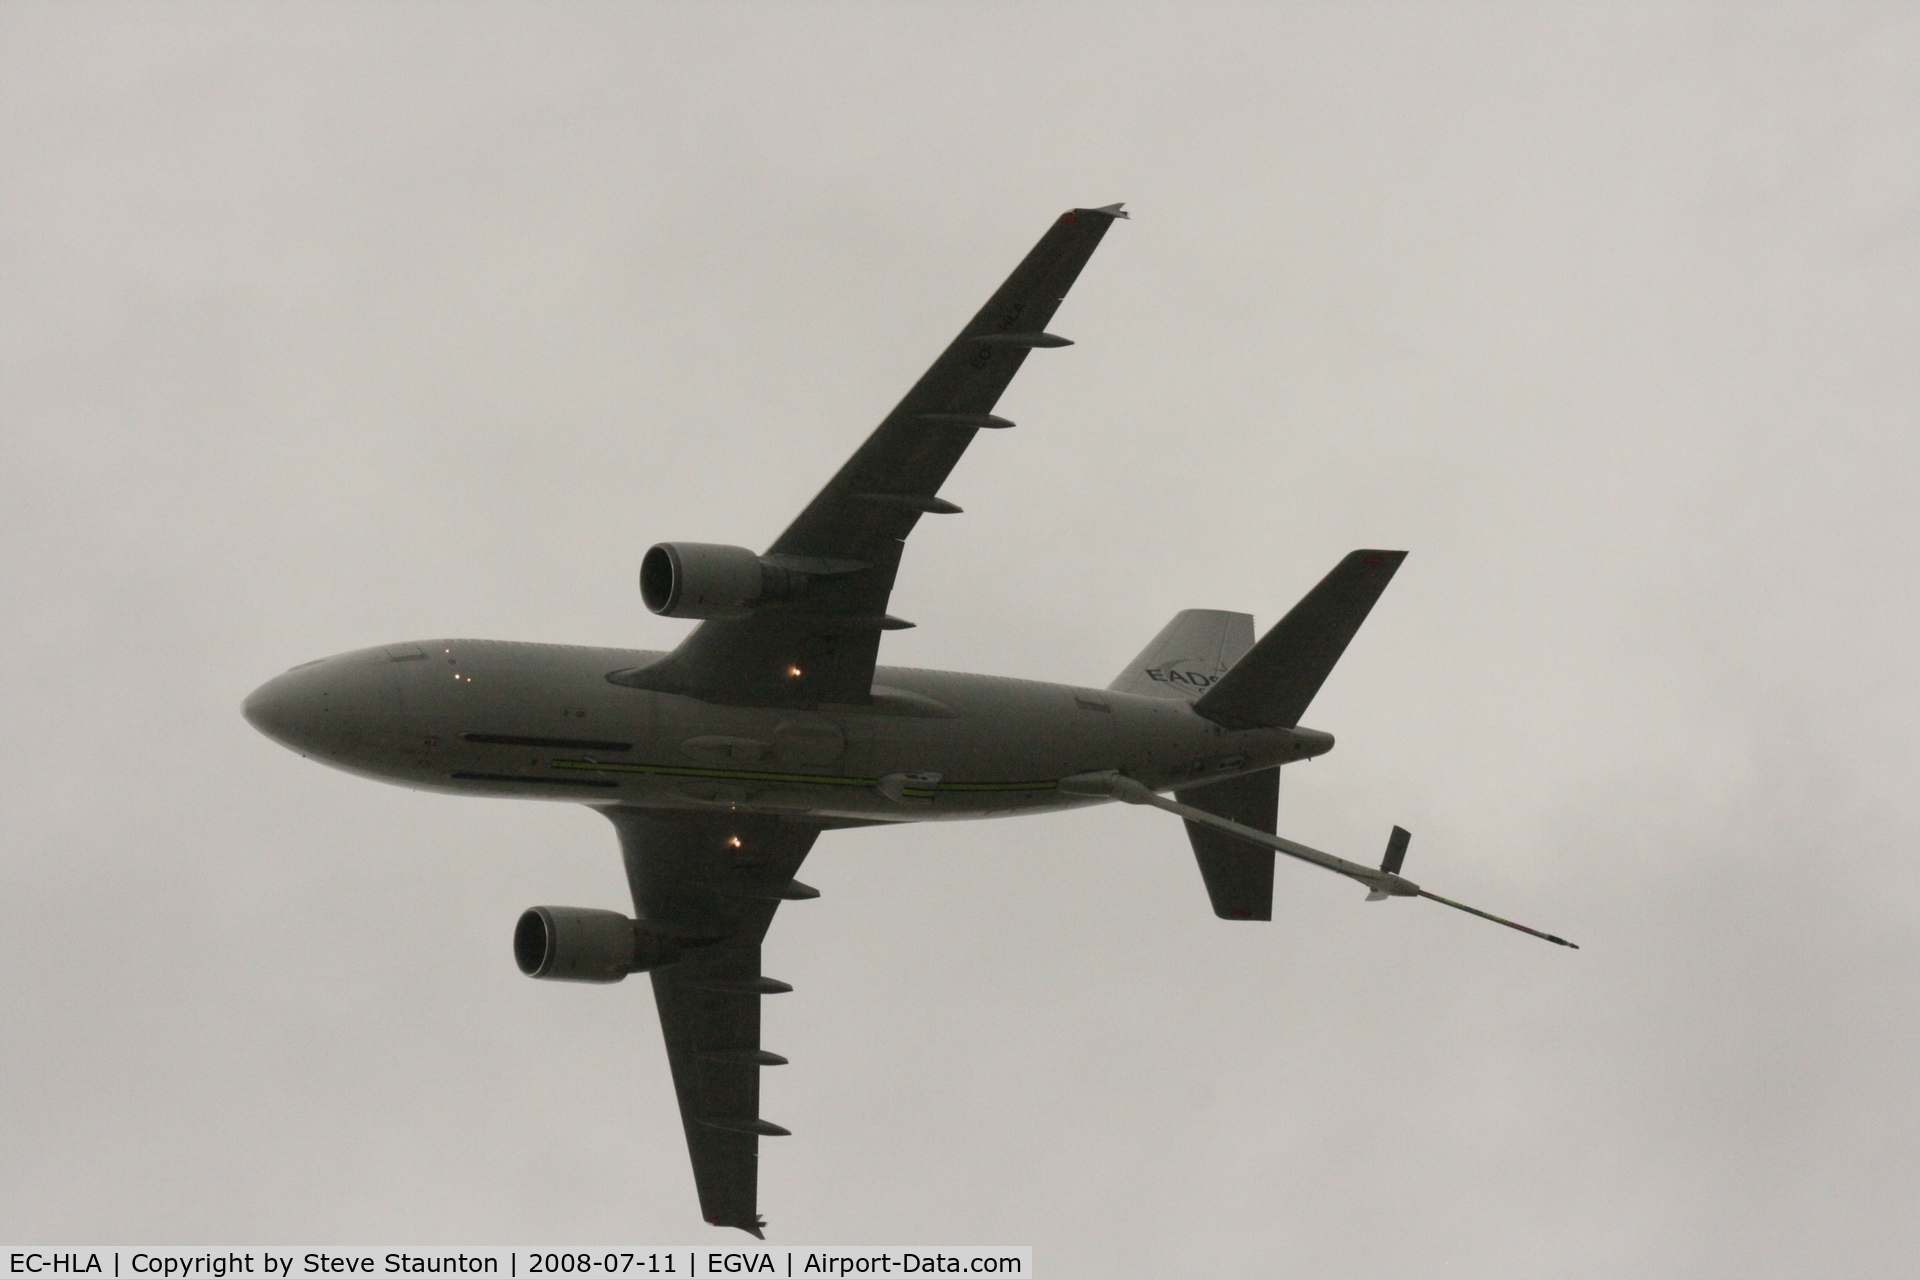 EC-HLA, Airbus A310-324/MRTT C/N 489, Taken at the Royal International Air Tattoo 2008 during arrivals and departures (show days cancelled due to bad weather)